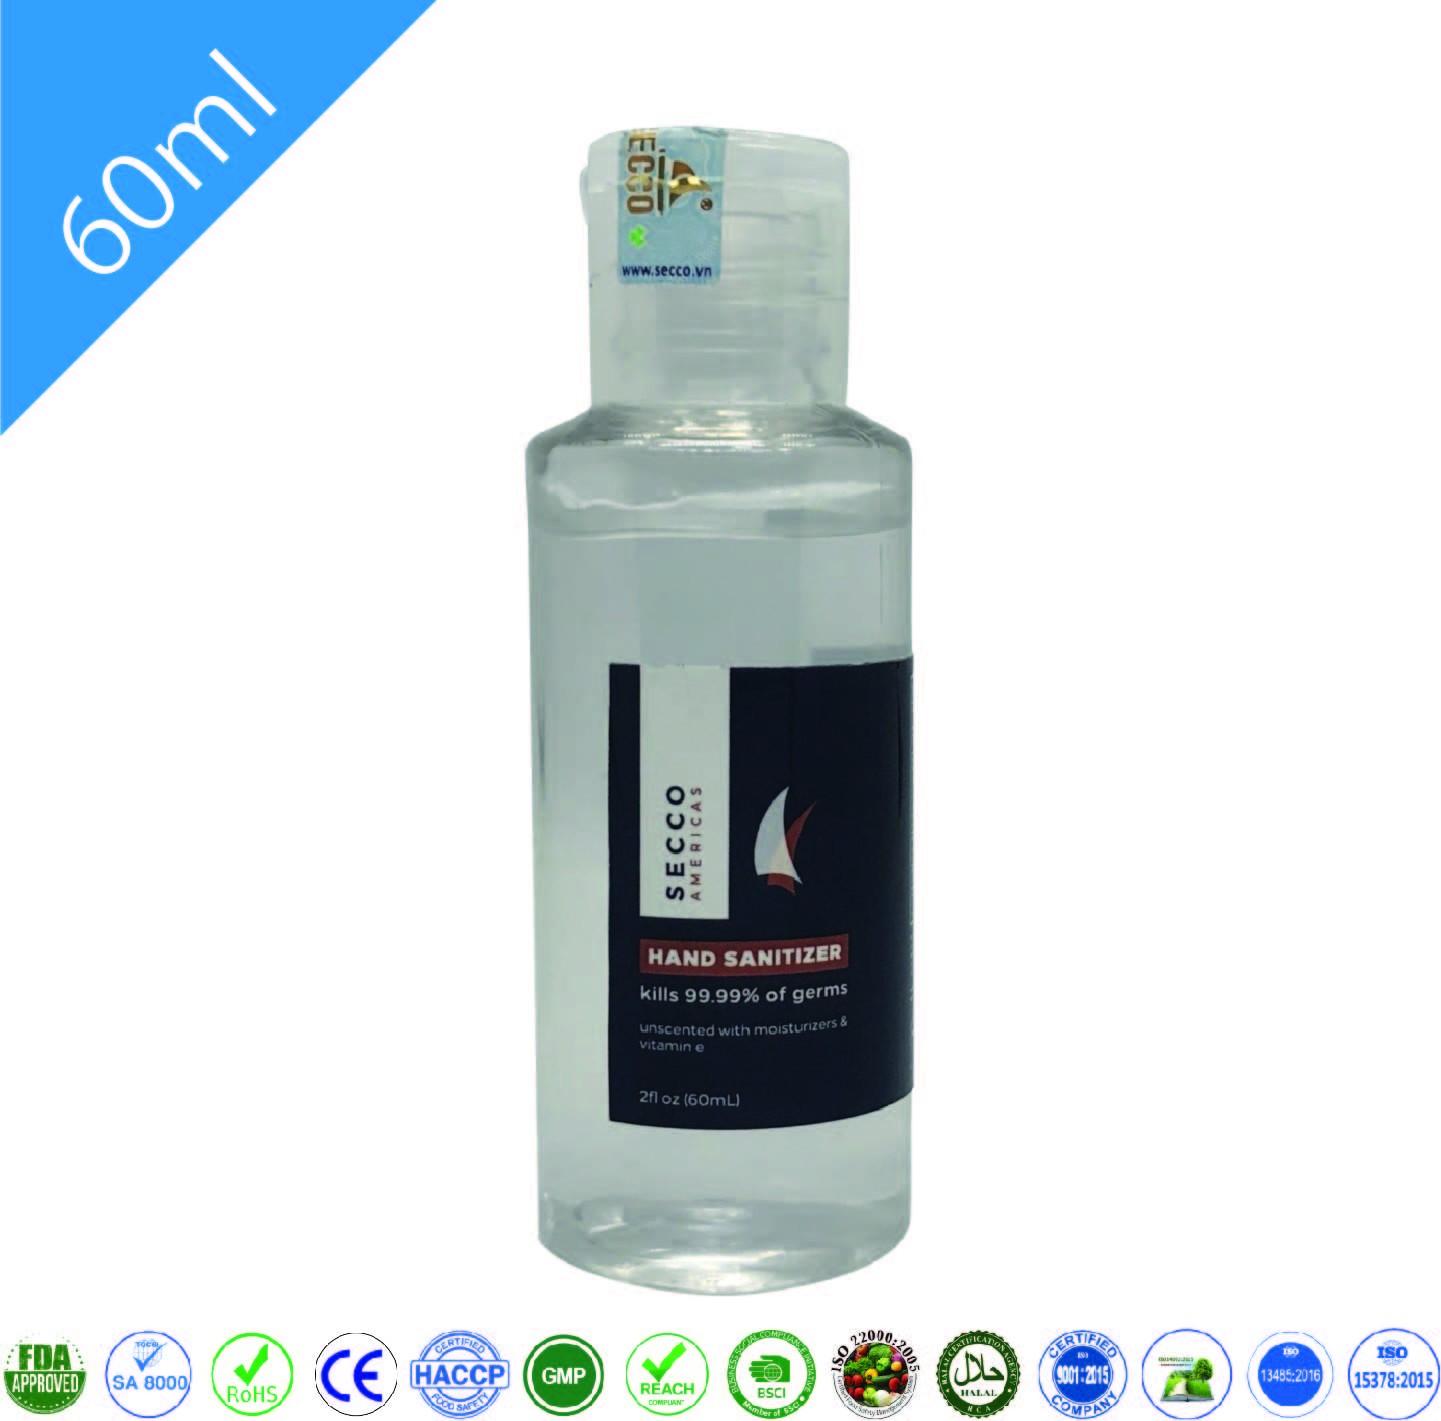 Secco hand sanitizer 60ml without pump